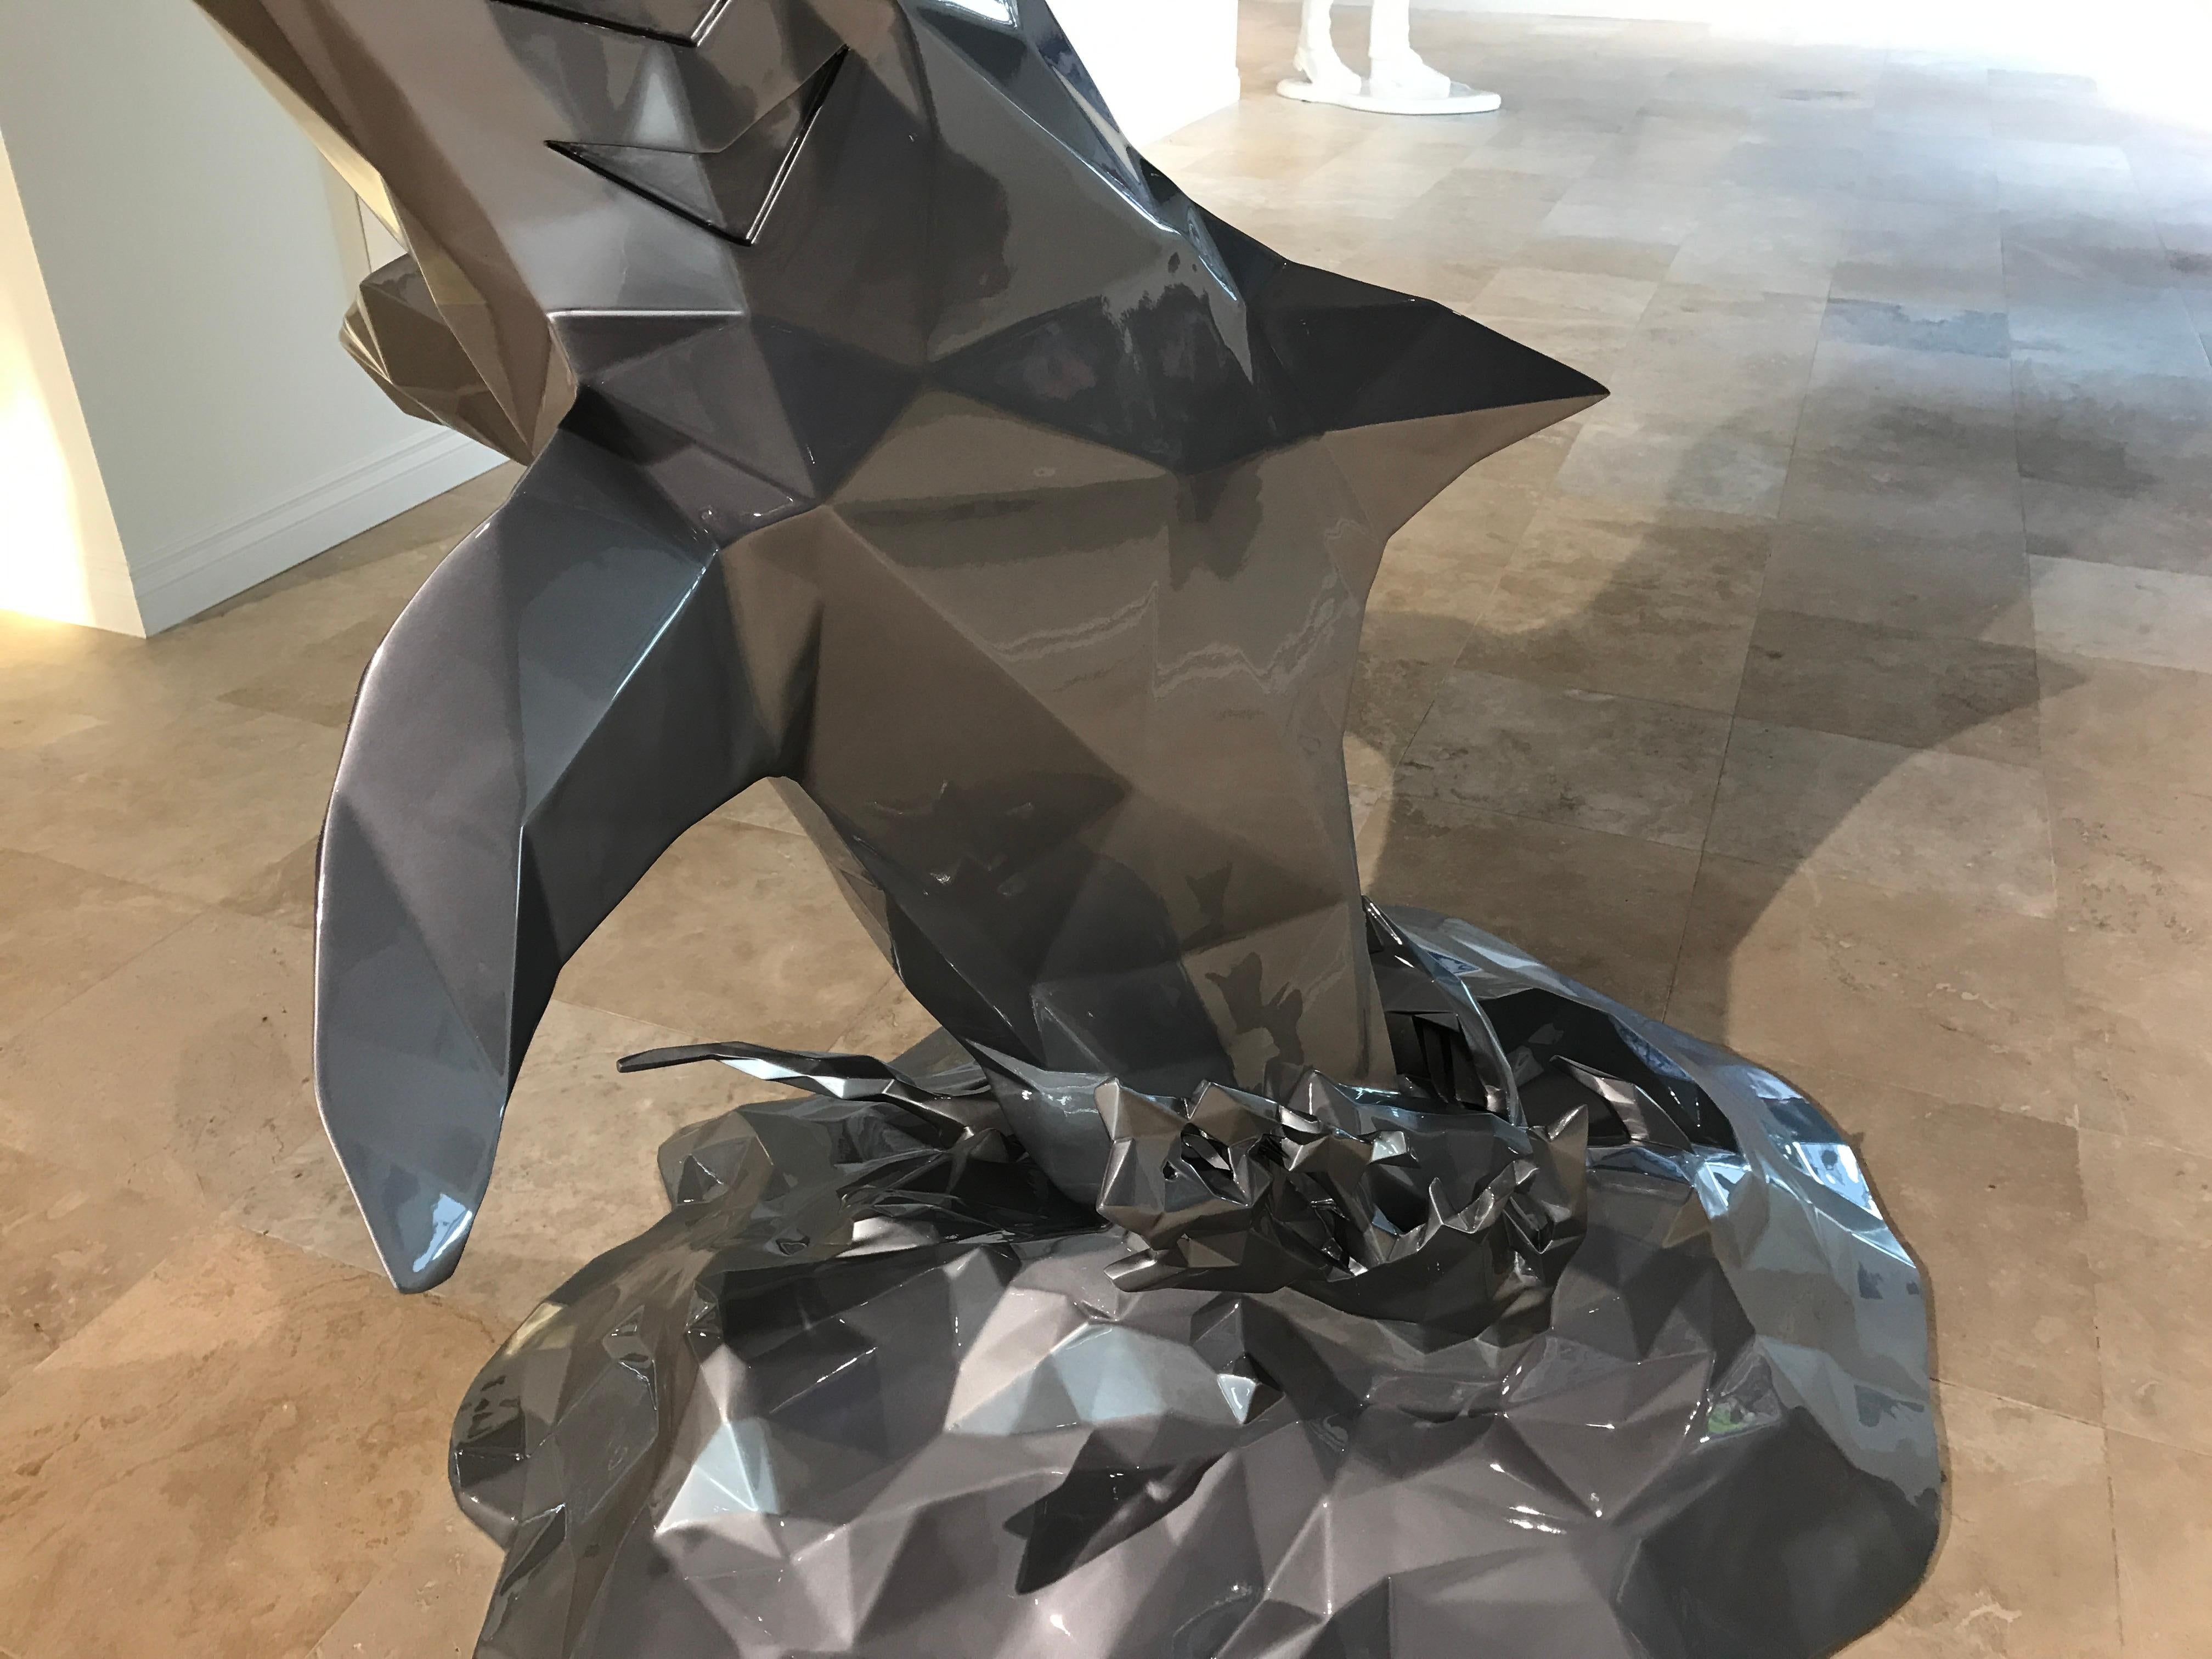 Resin sculpture, this work is numbered 8 of 8.
Dimensions: 70.8 x 55.5 x 47 in. / 180 x 141 x 119 cm
Sculpture can go indoors or outdoors.

Biography:
Richard Orlinski is a French artist born in Paris (France) in 1966. 
Sculptor since 2004, his